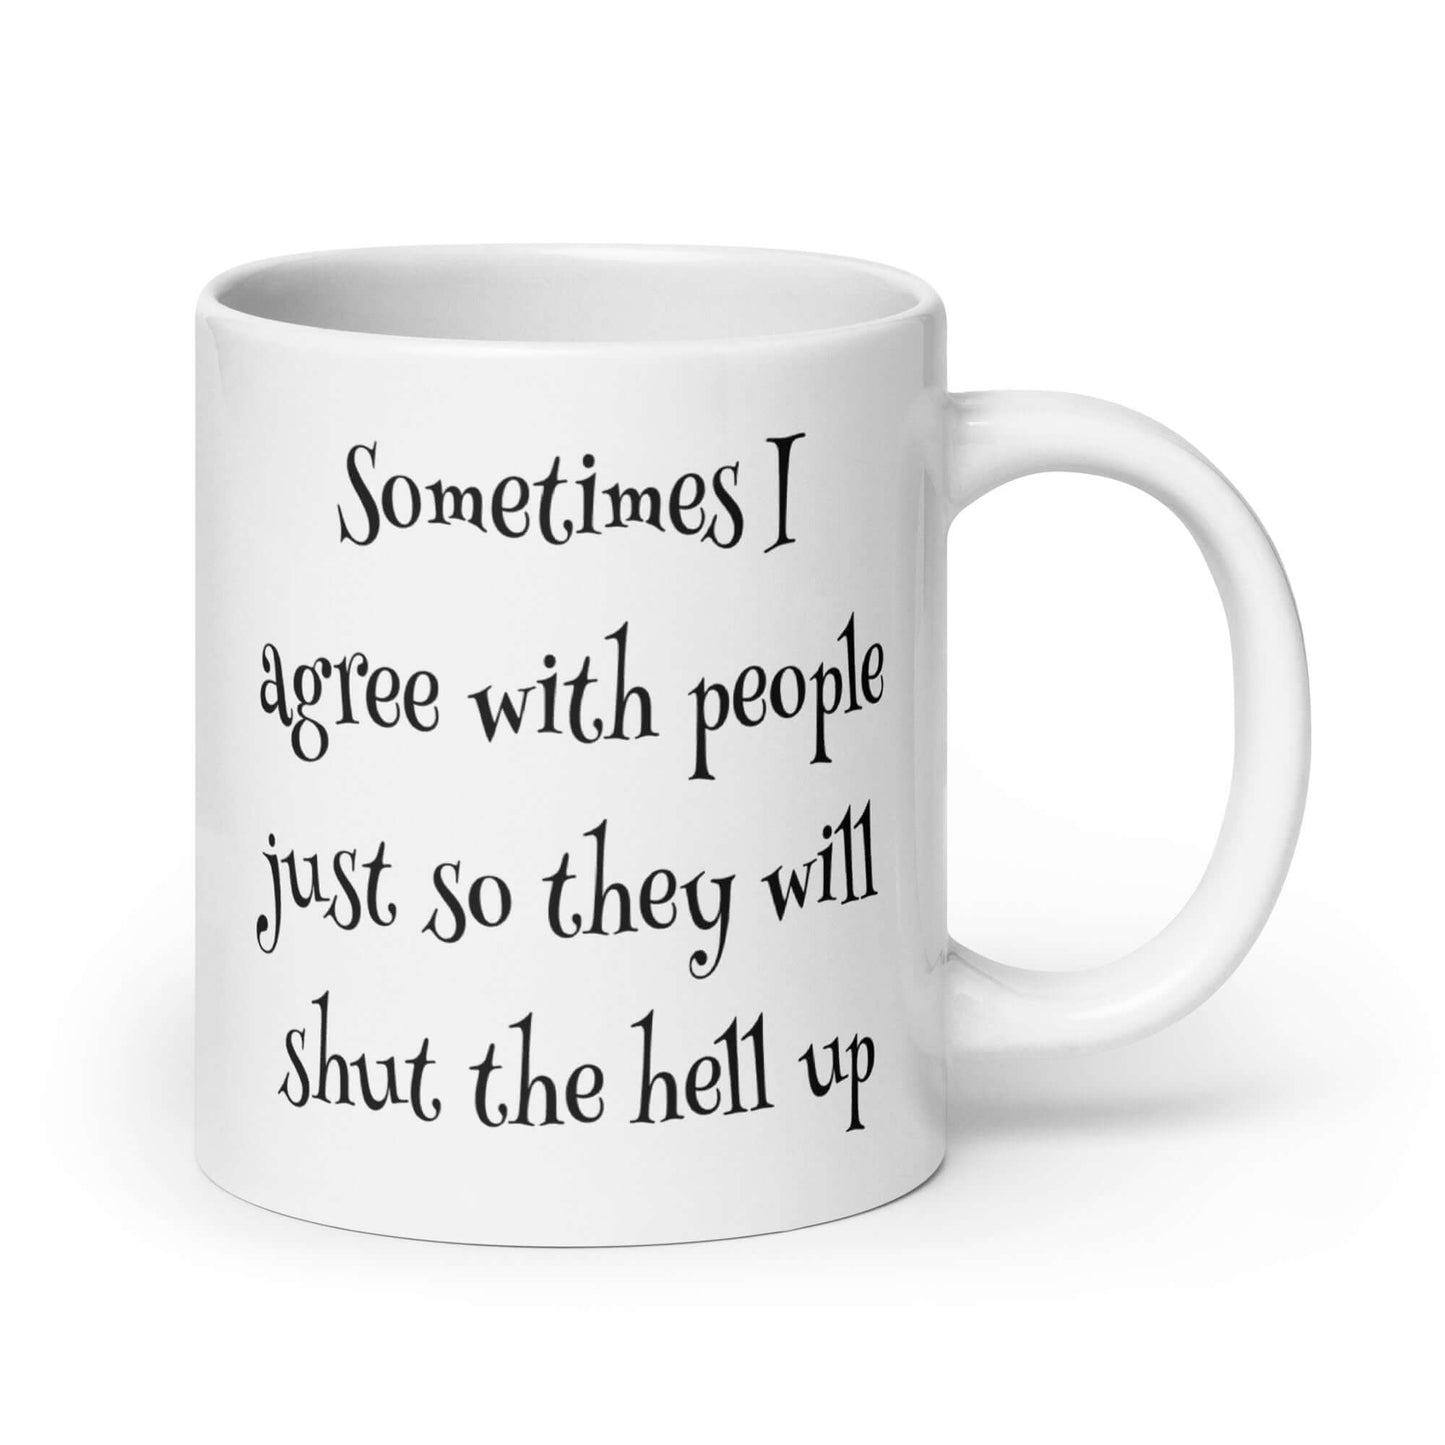 Sometimes I agree with people just so they will shut the hell up mug